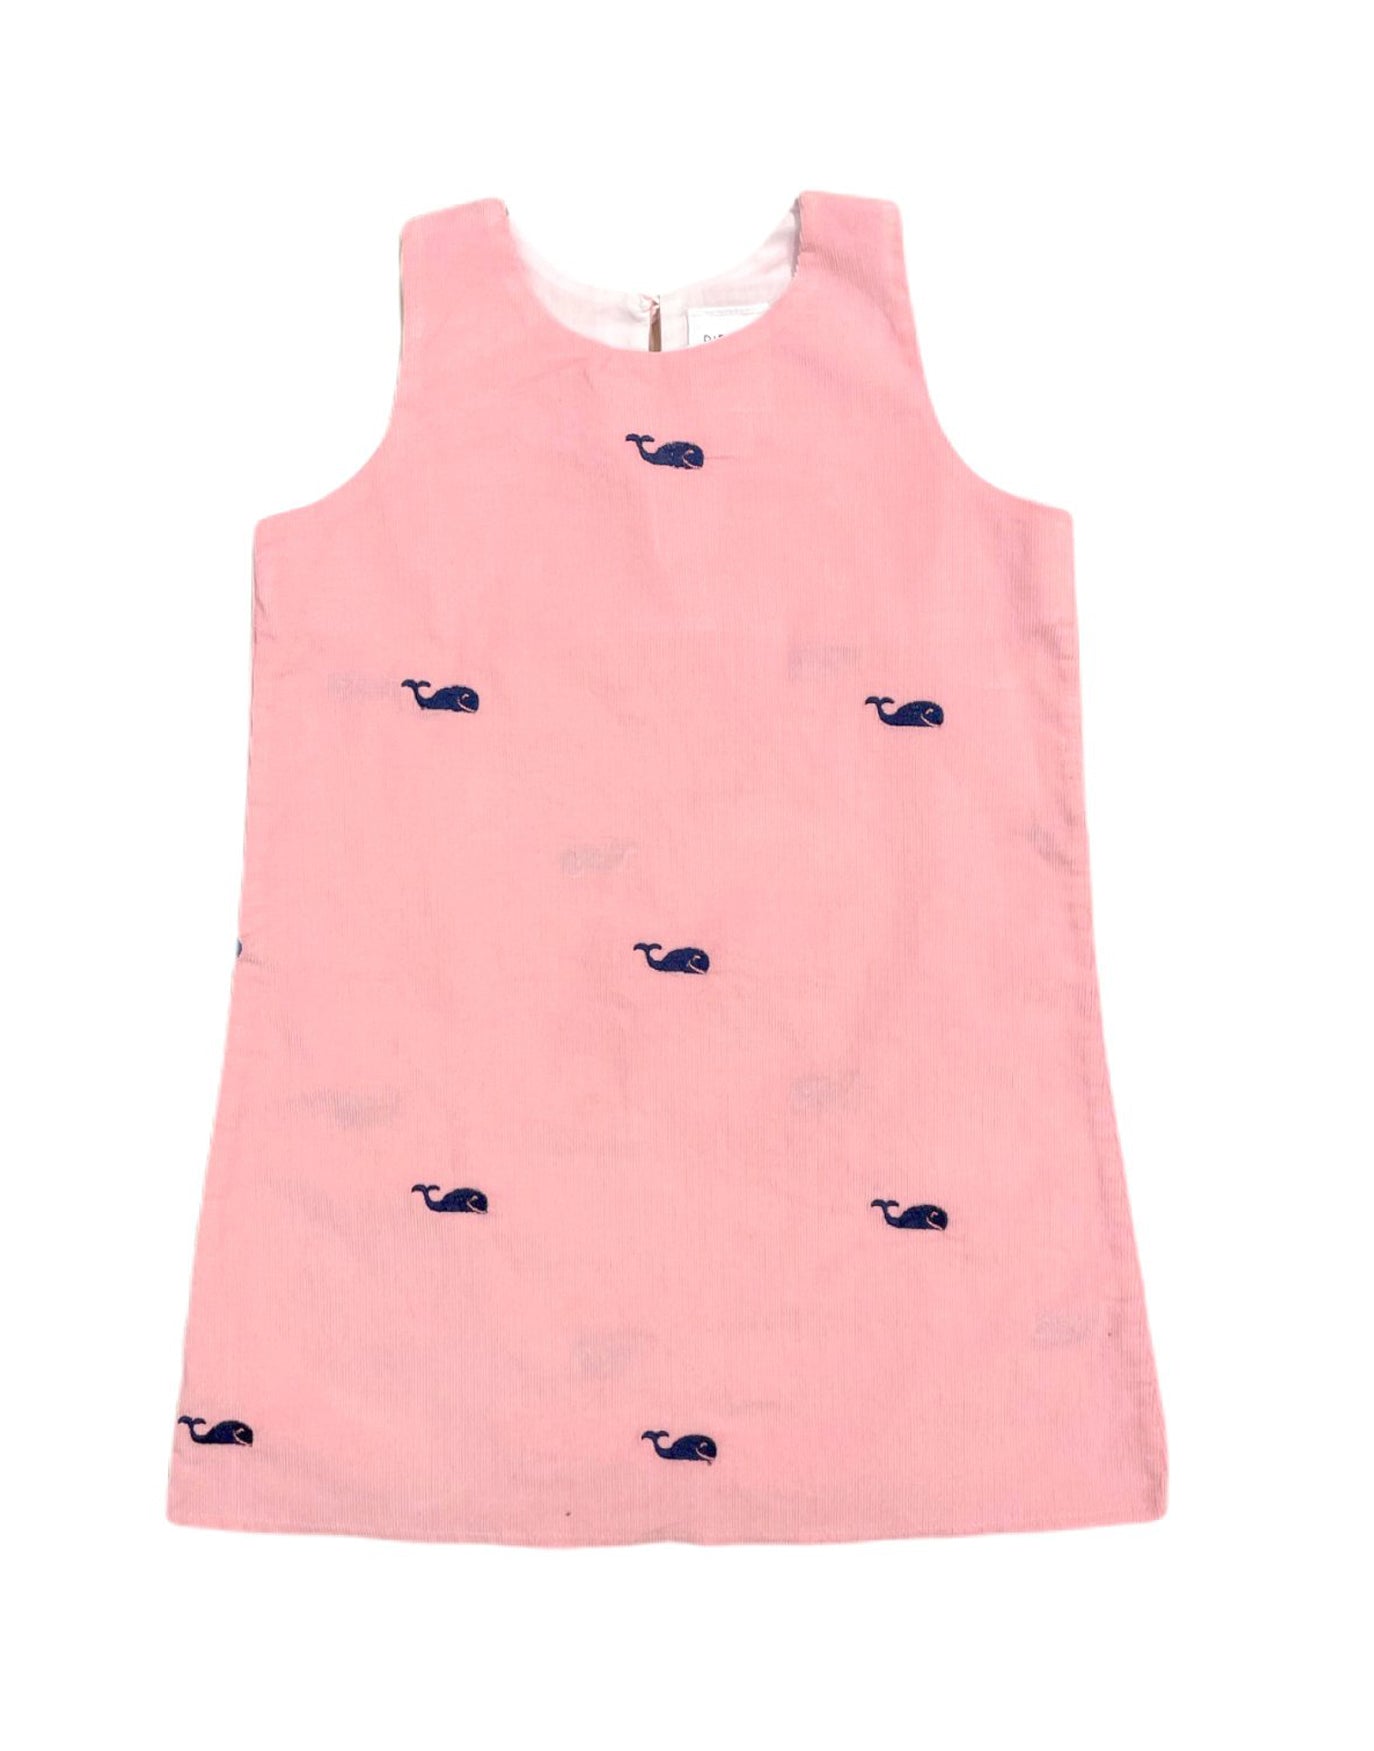 Light Pink Corduroy Jumper Dress with Embroidered Navy Whales